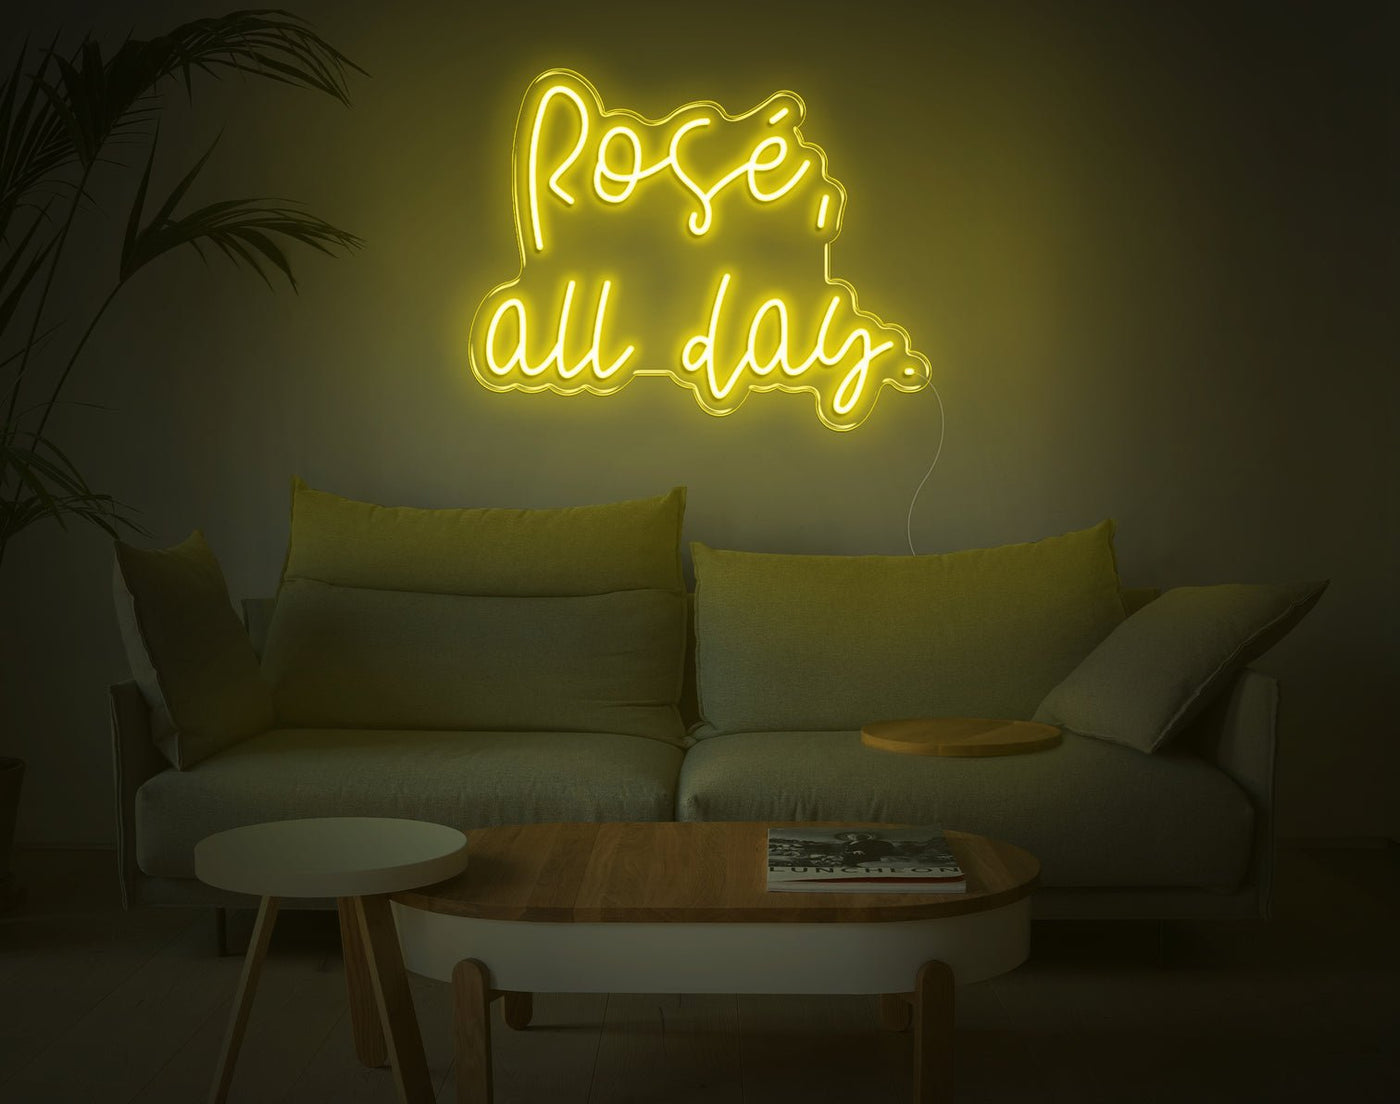 Rose All Day LED Neon Sign - 17inch x 22inchHot Pink